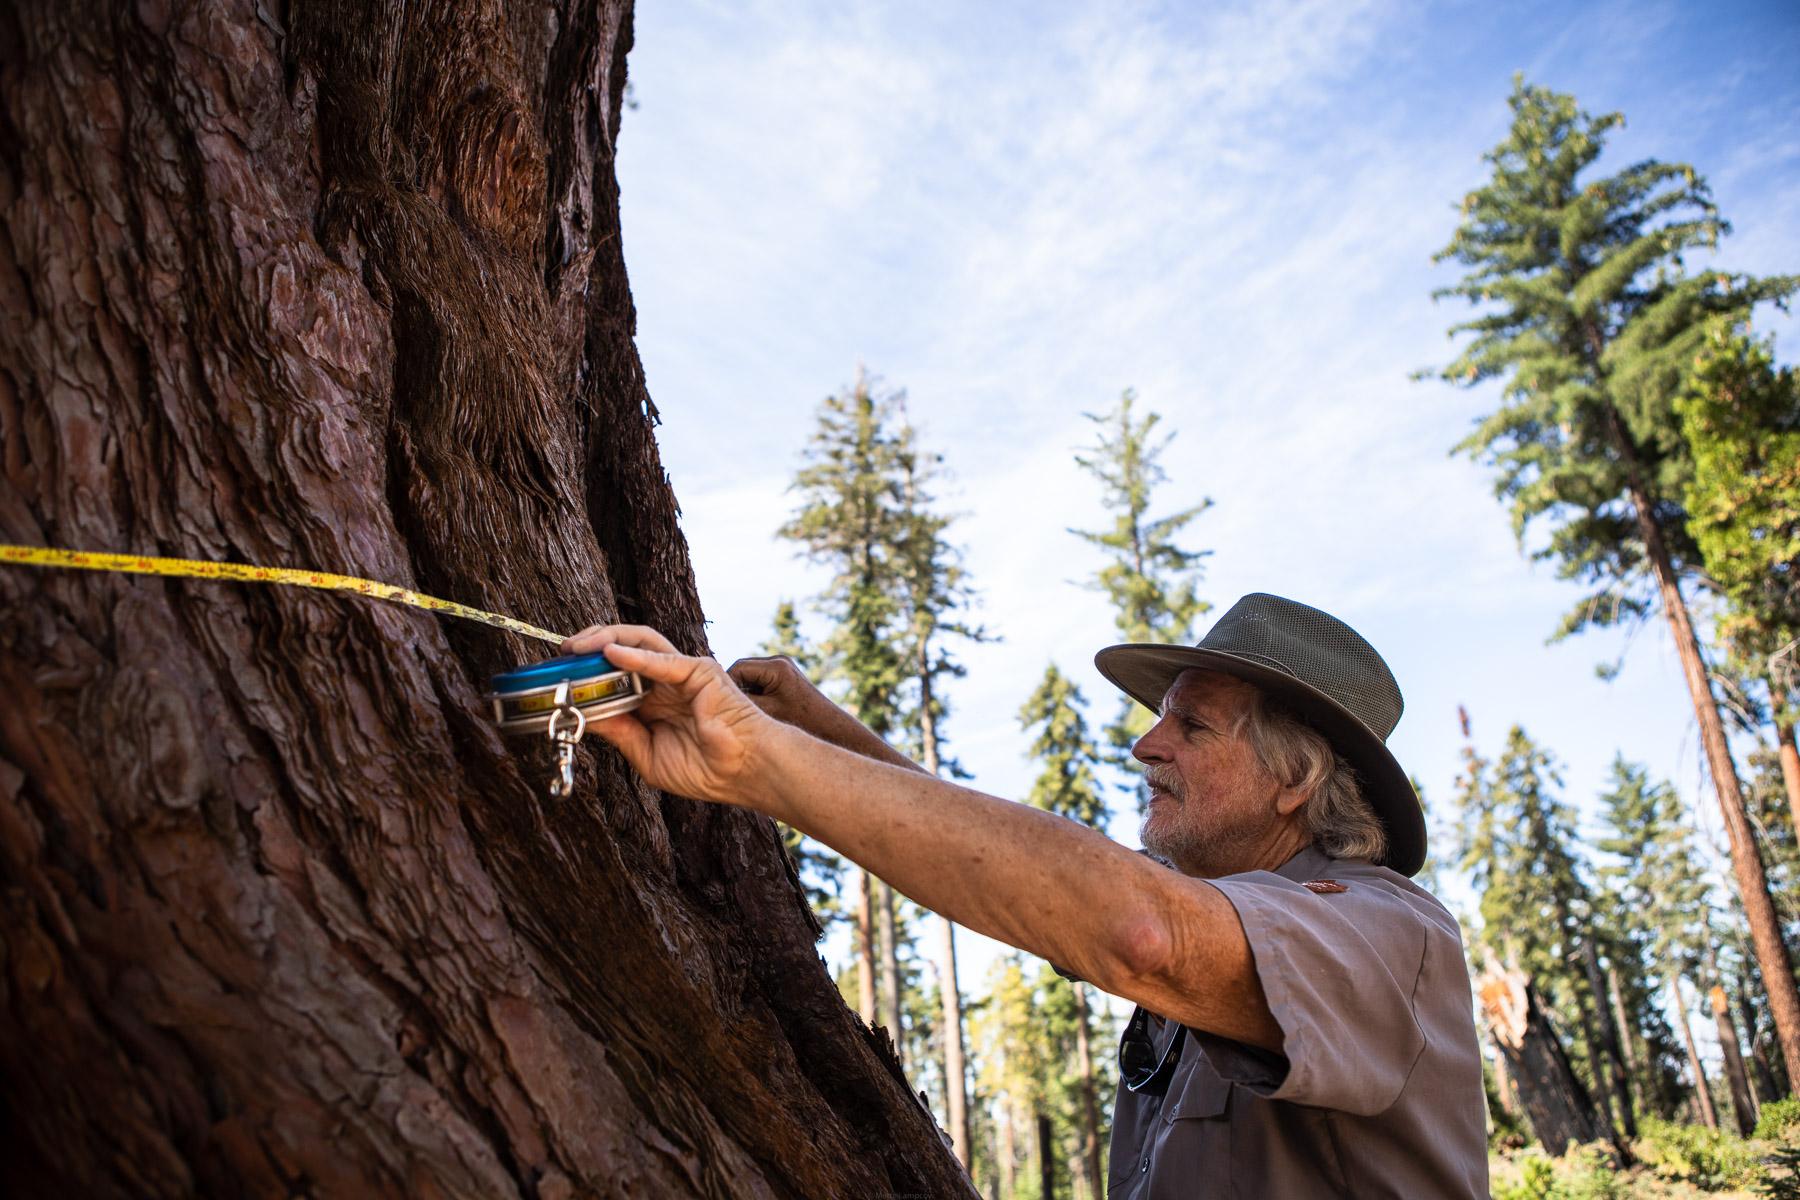 - Sequoia, a year in a burning forest - Tony Caprio fire ecologist for Sequoia and Kings Canyon...